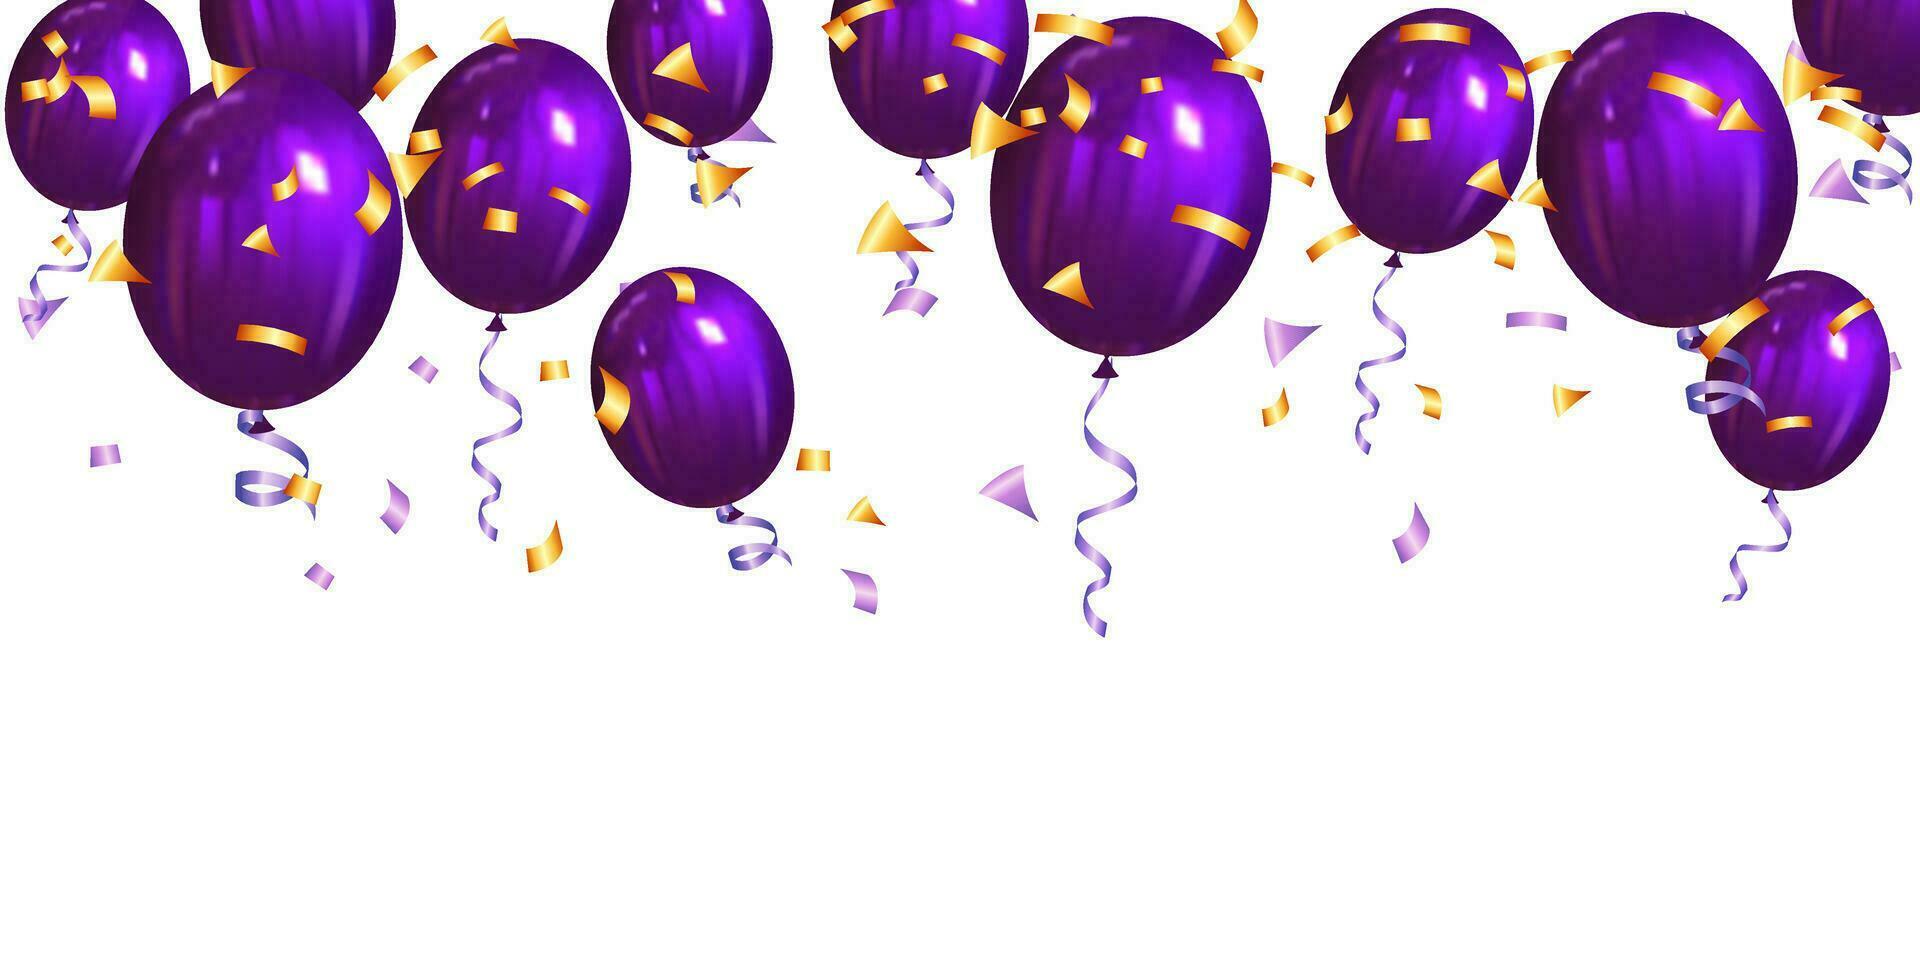 purple balloons with ribbons and gold confetti. Vector illustration